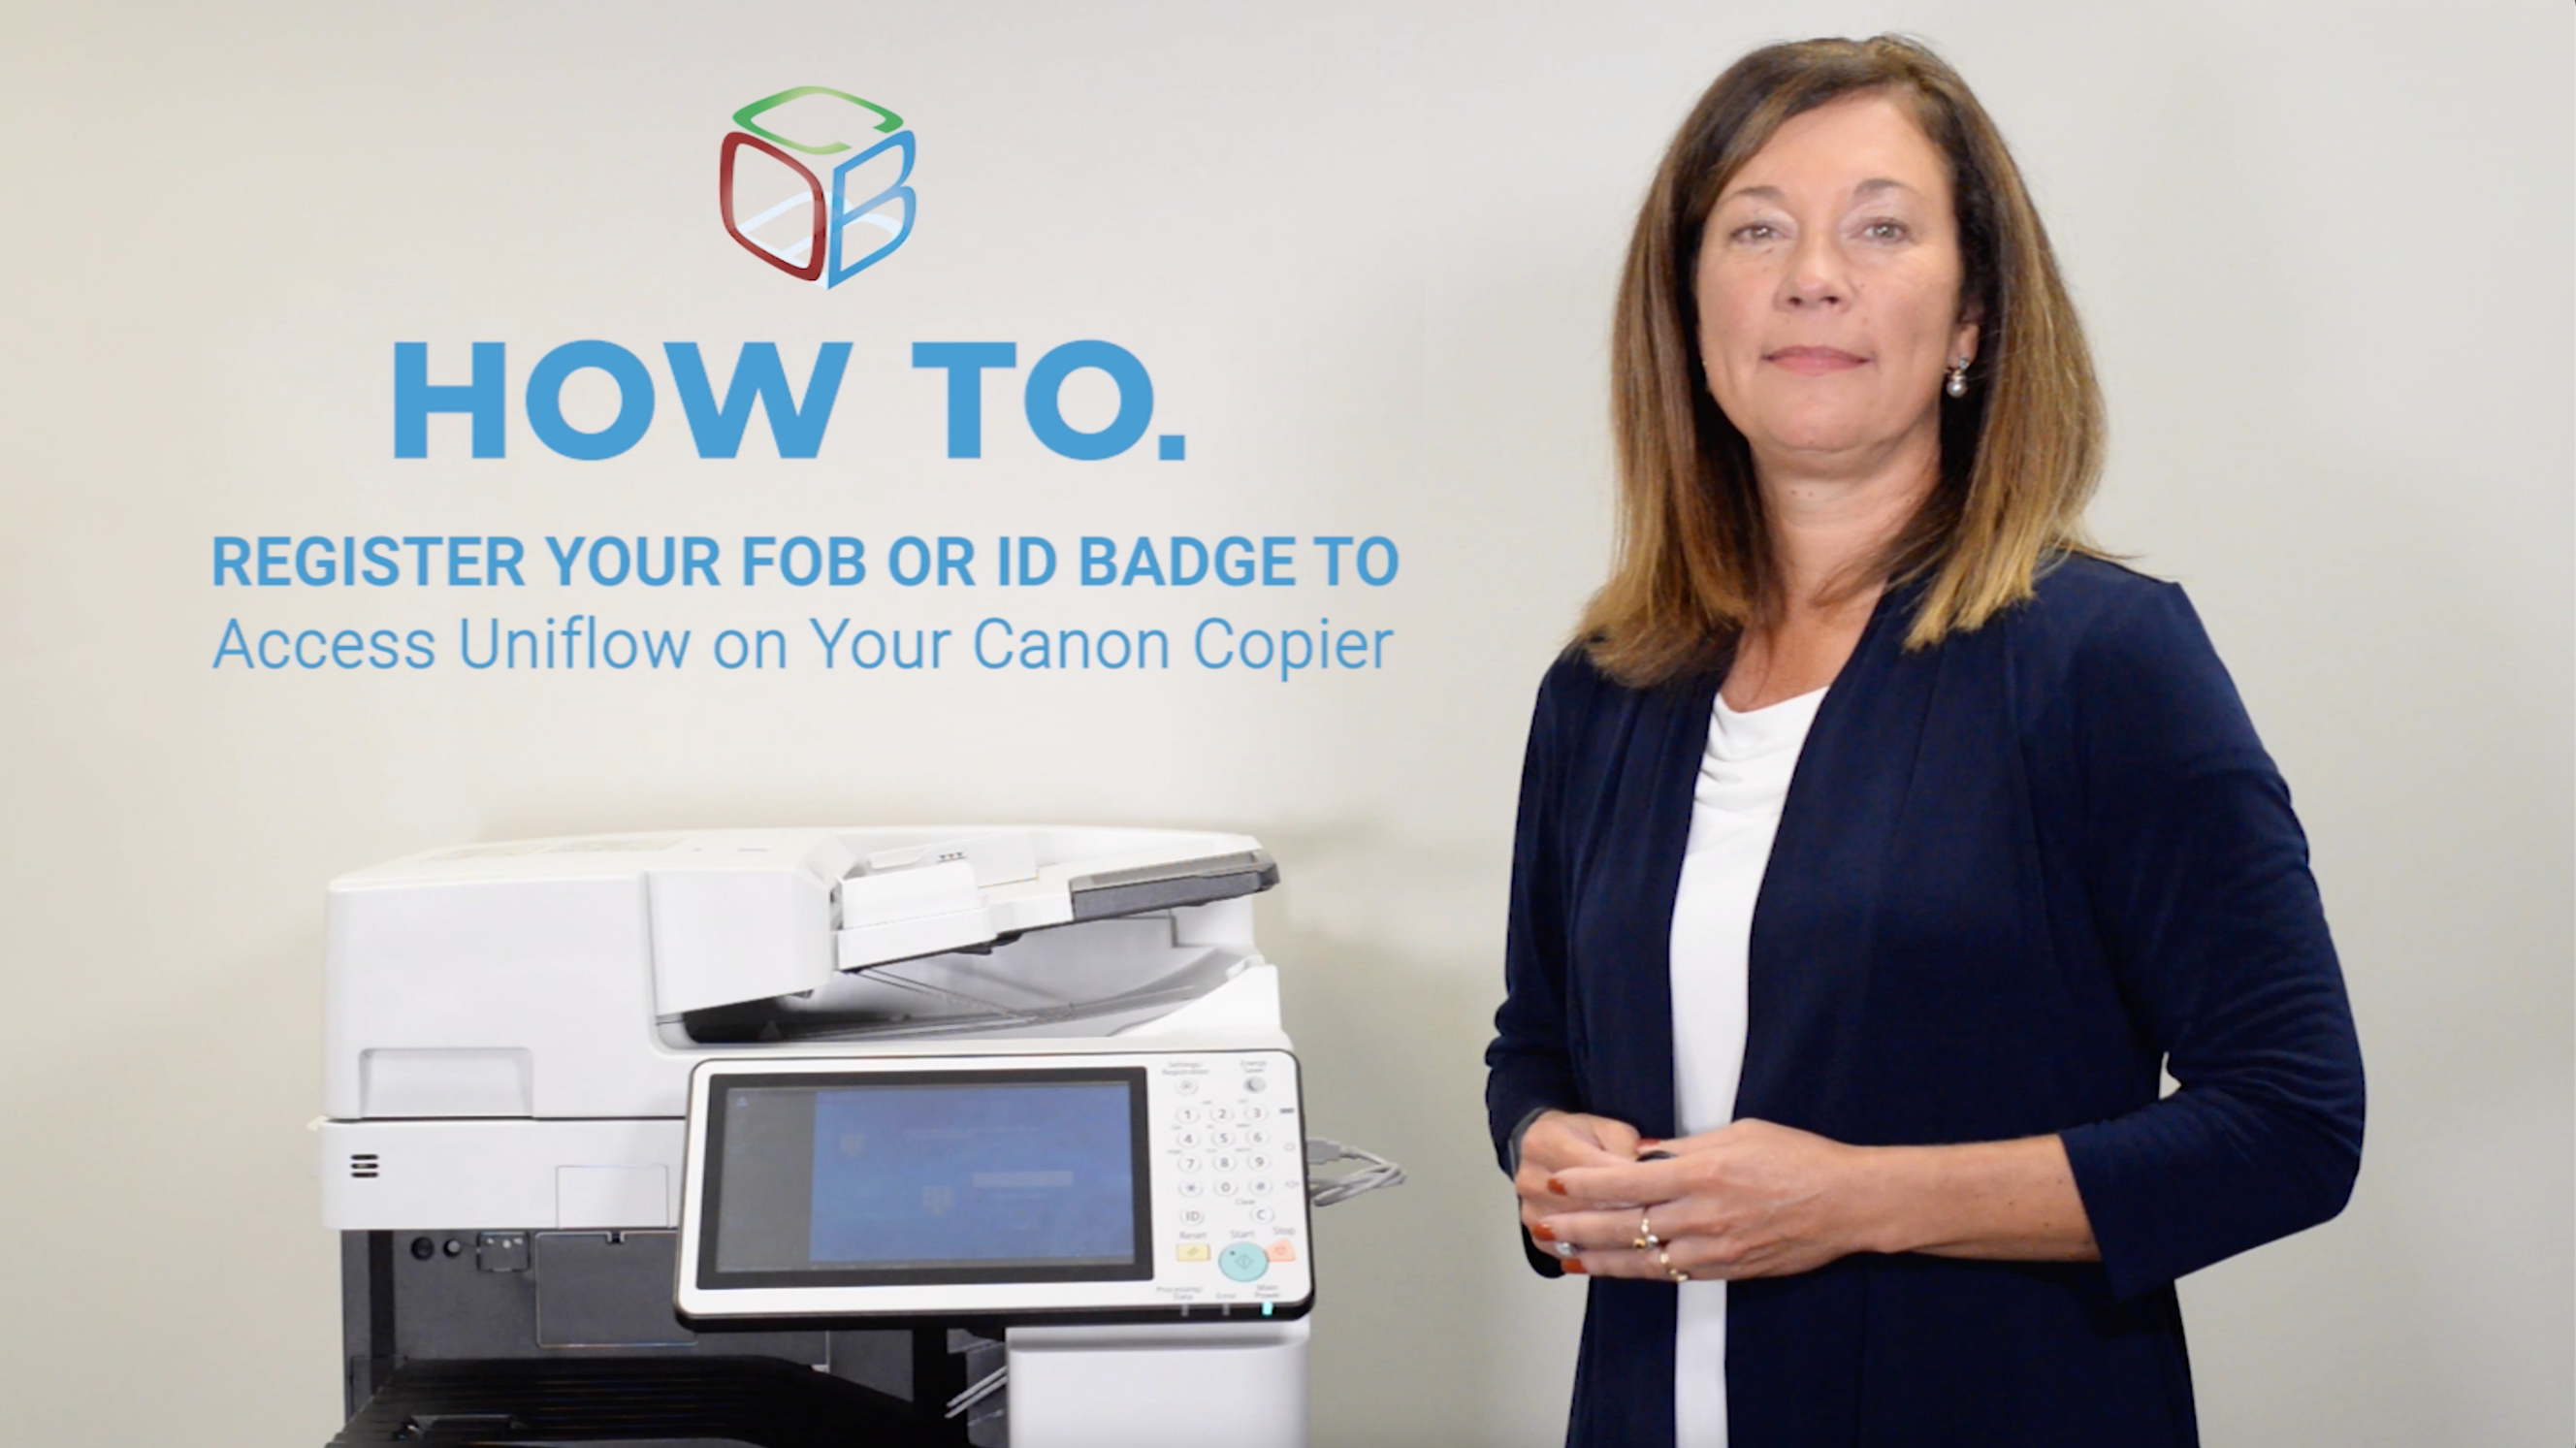 How to Register Your Fob or ID Badge to Access Uniflow on Your Canon Copier